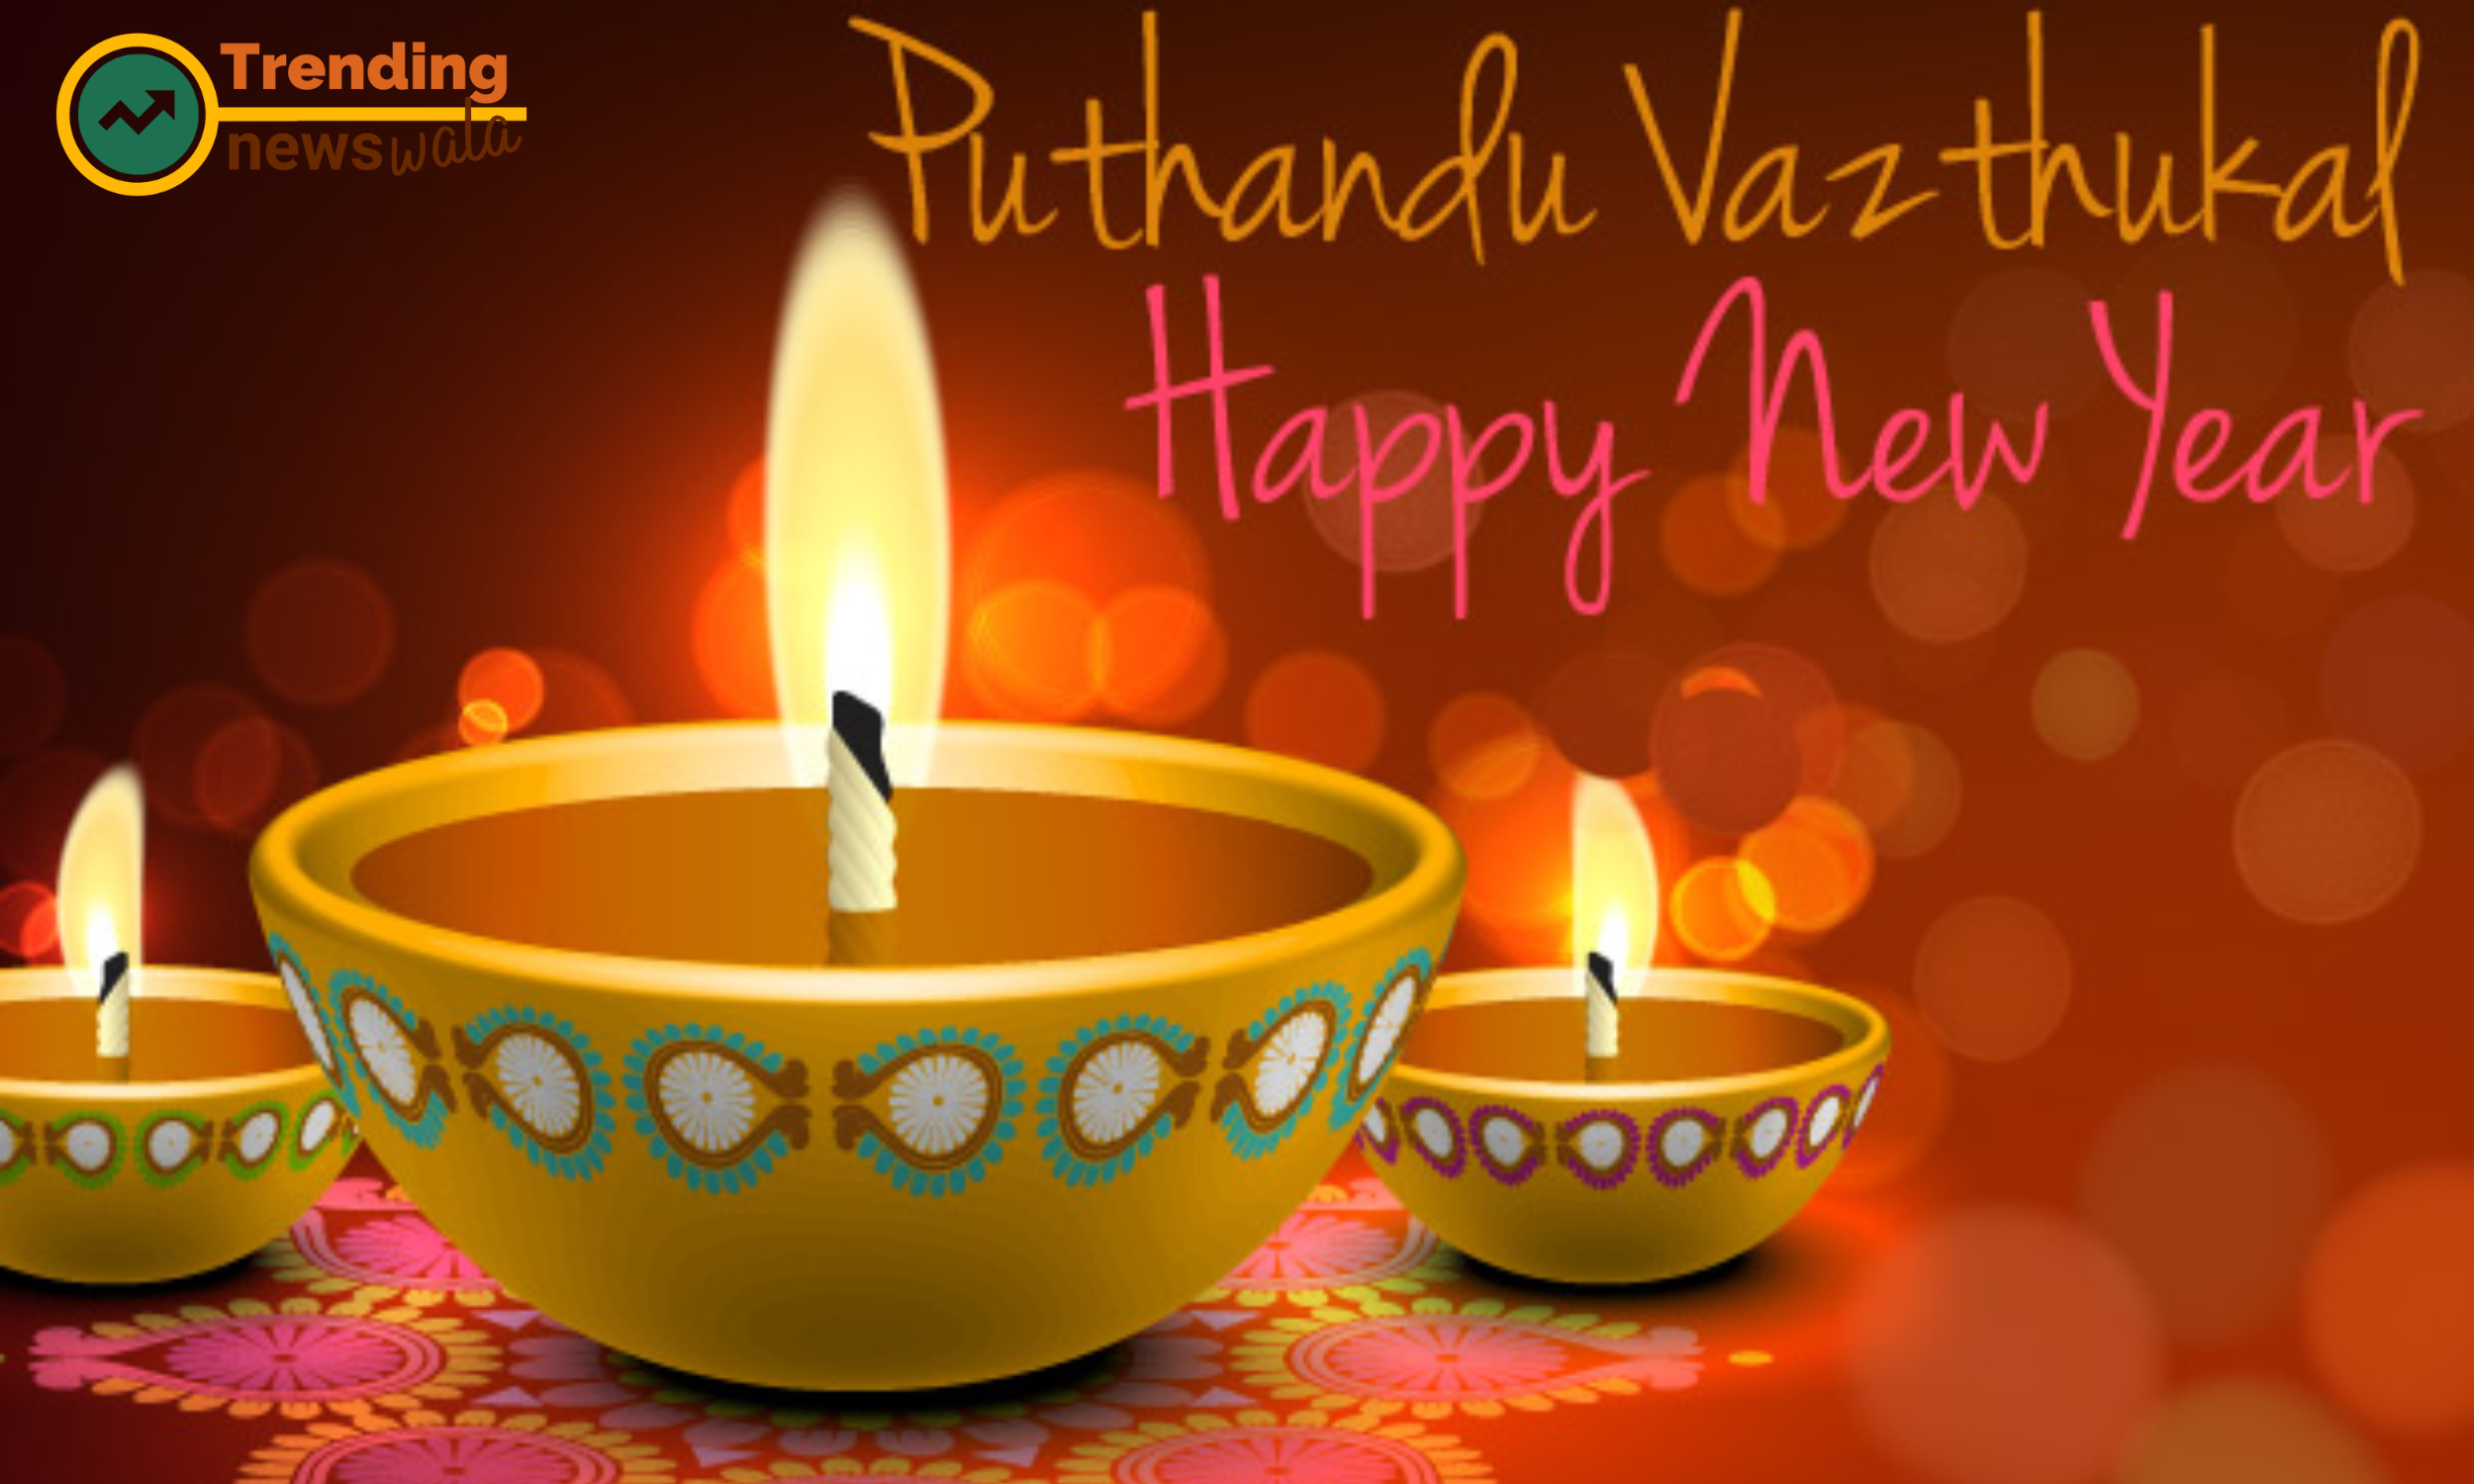 Puthandu Vazthukal meaning deep color fulla traditional Tamil New Year greeting exchanged